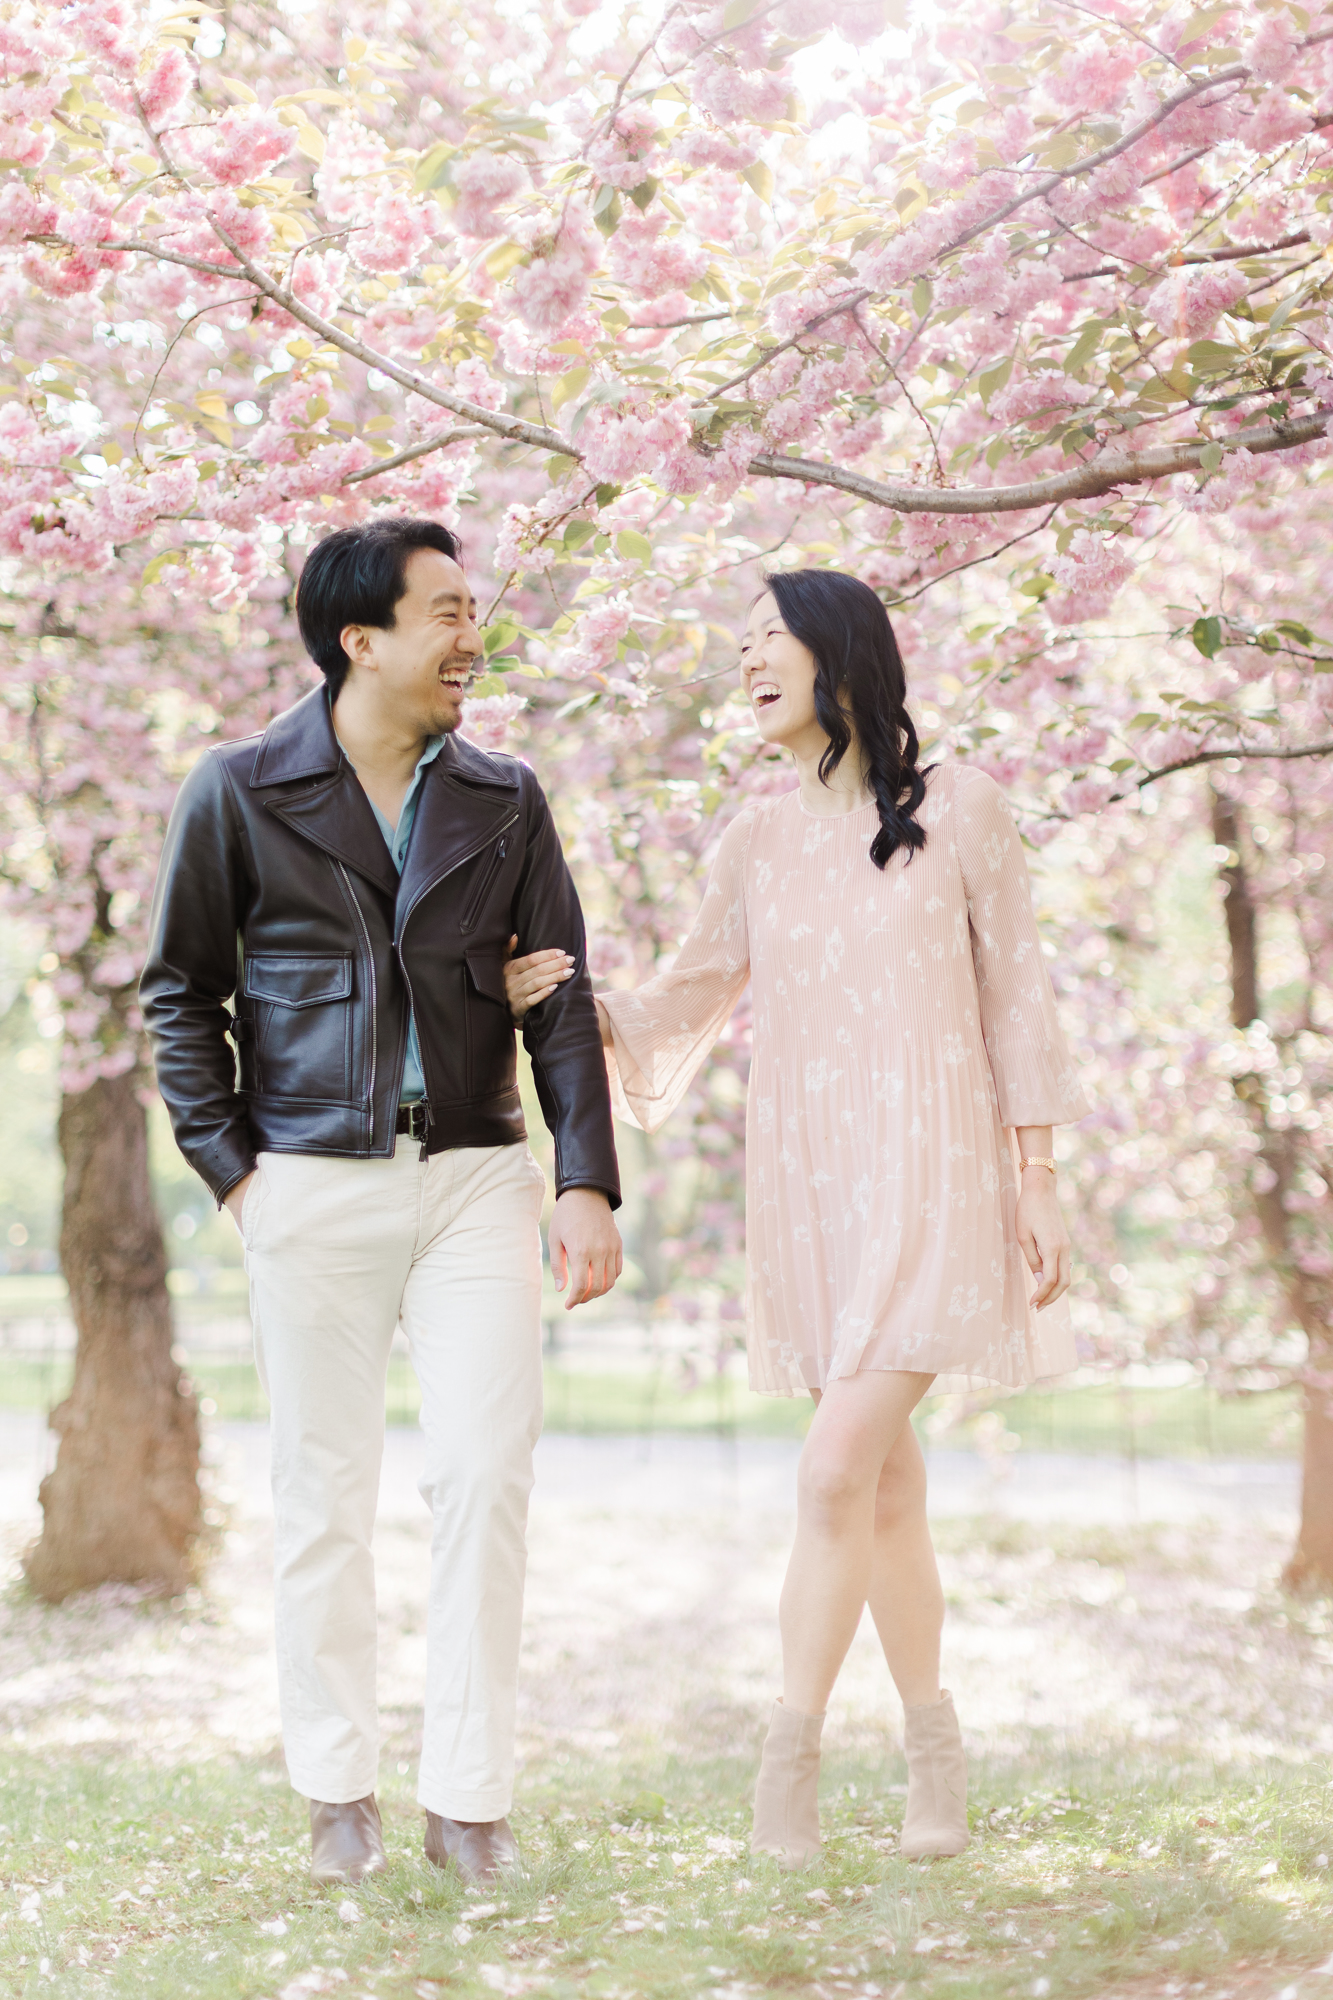 Charming Engagement Photos With Cherry Blossoms in NYC